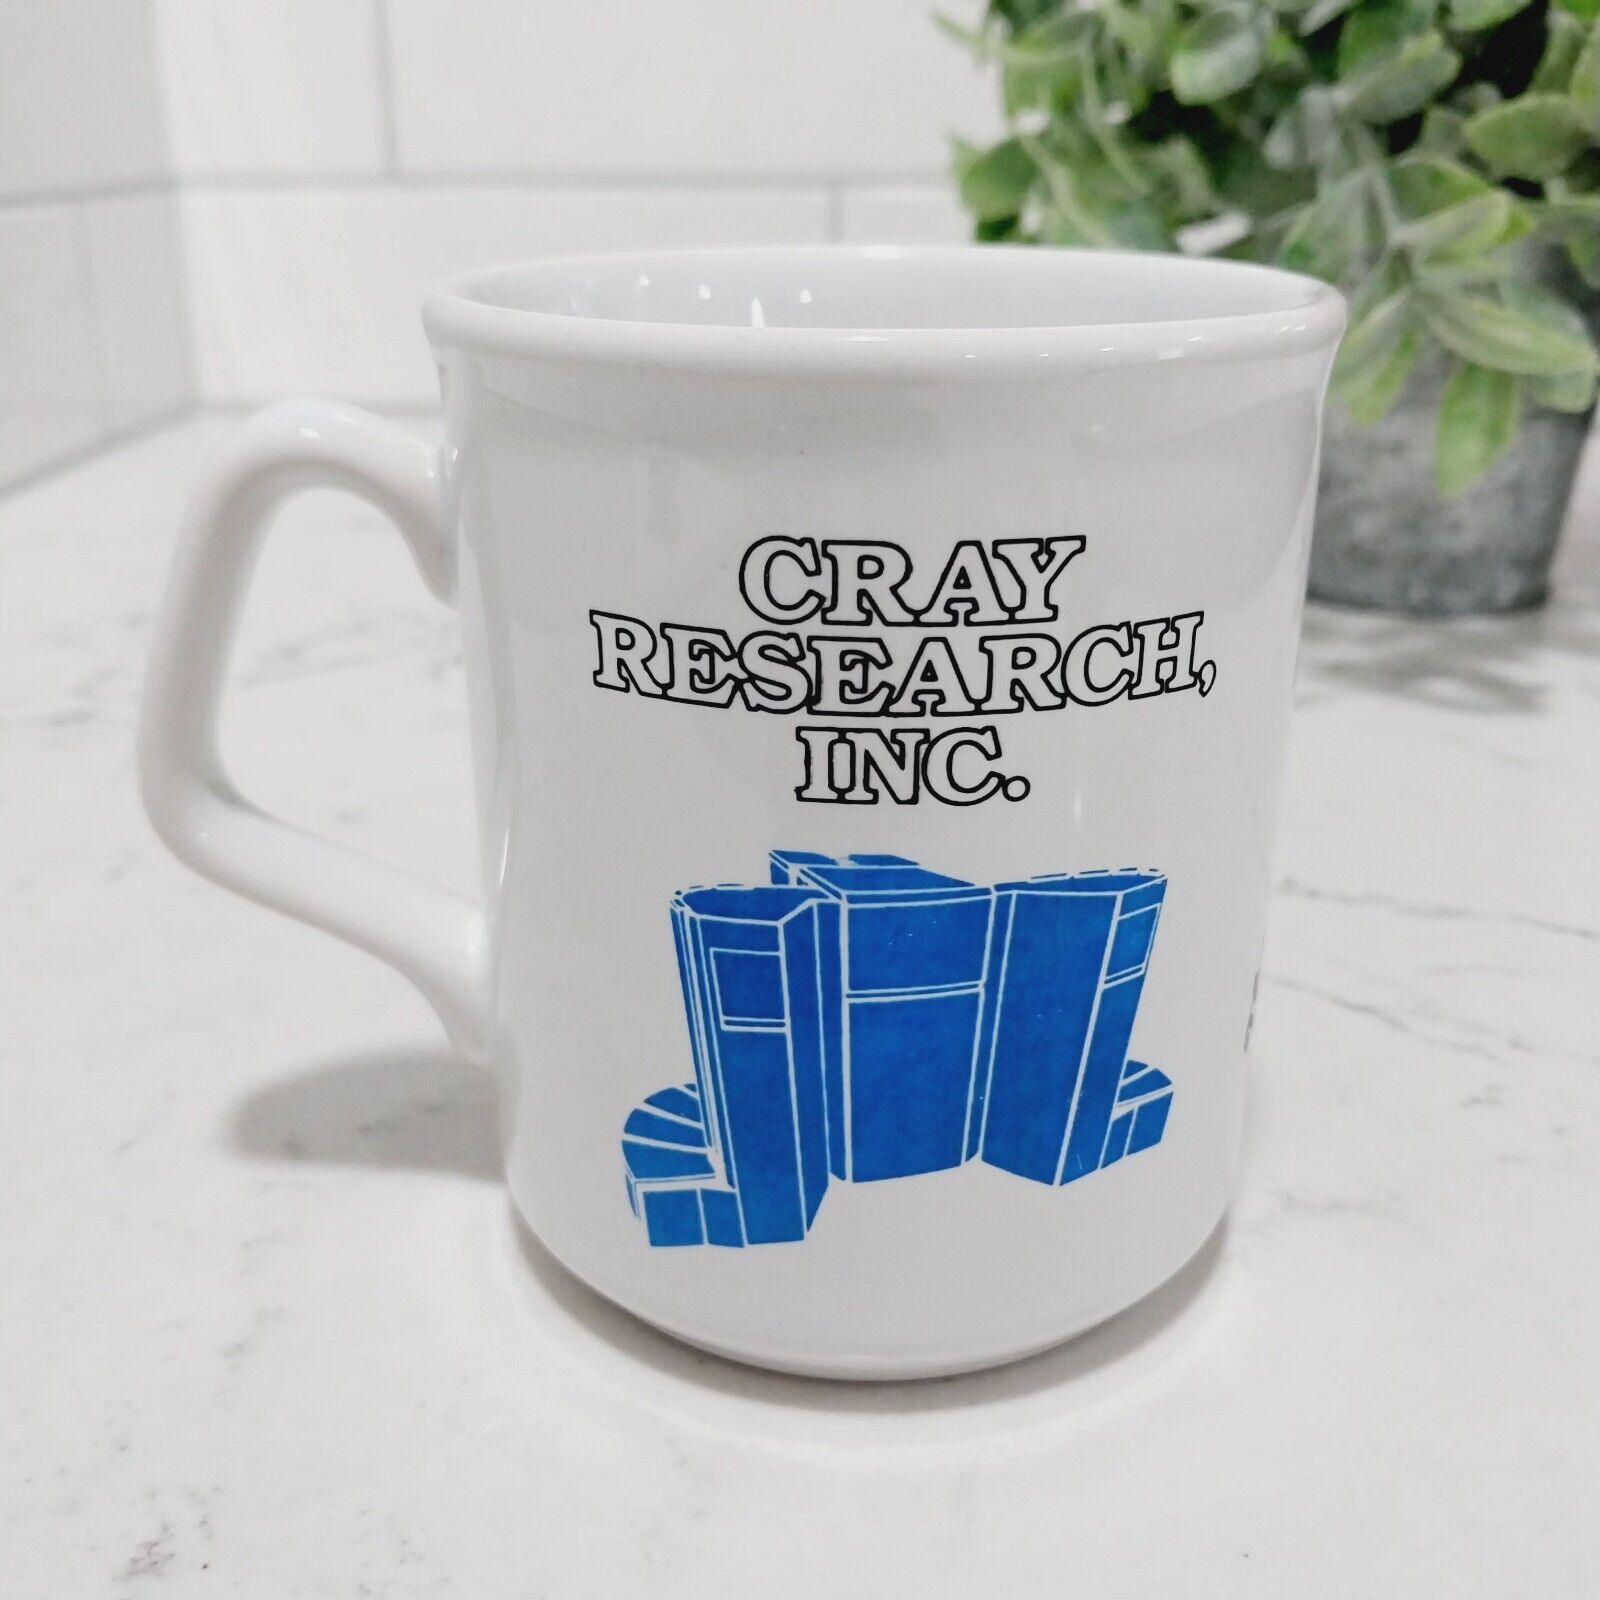 ⚡️ CRAY Research Inc. Vintage Coffee Cup Mug The Supercomputer People Excellent